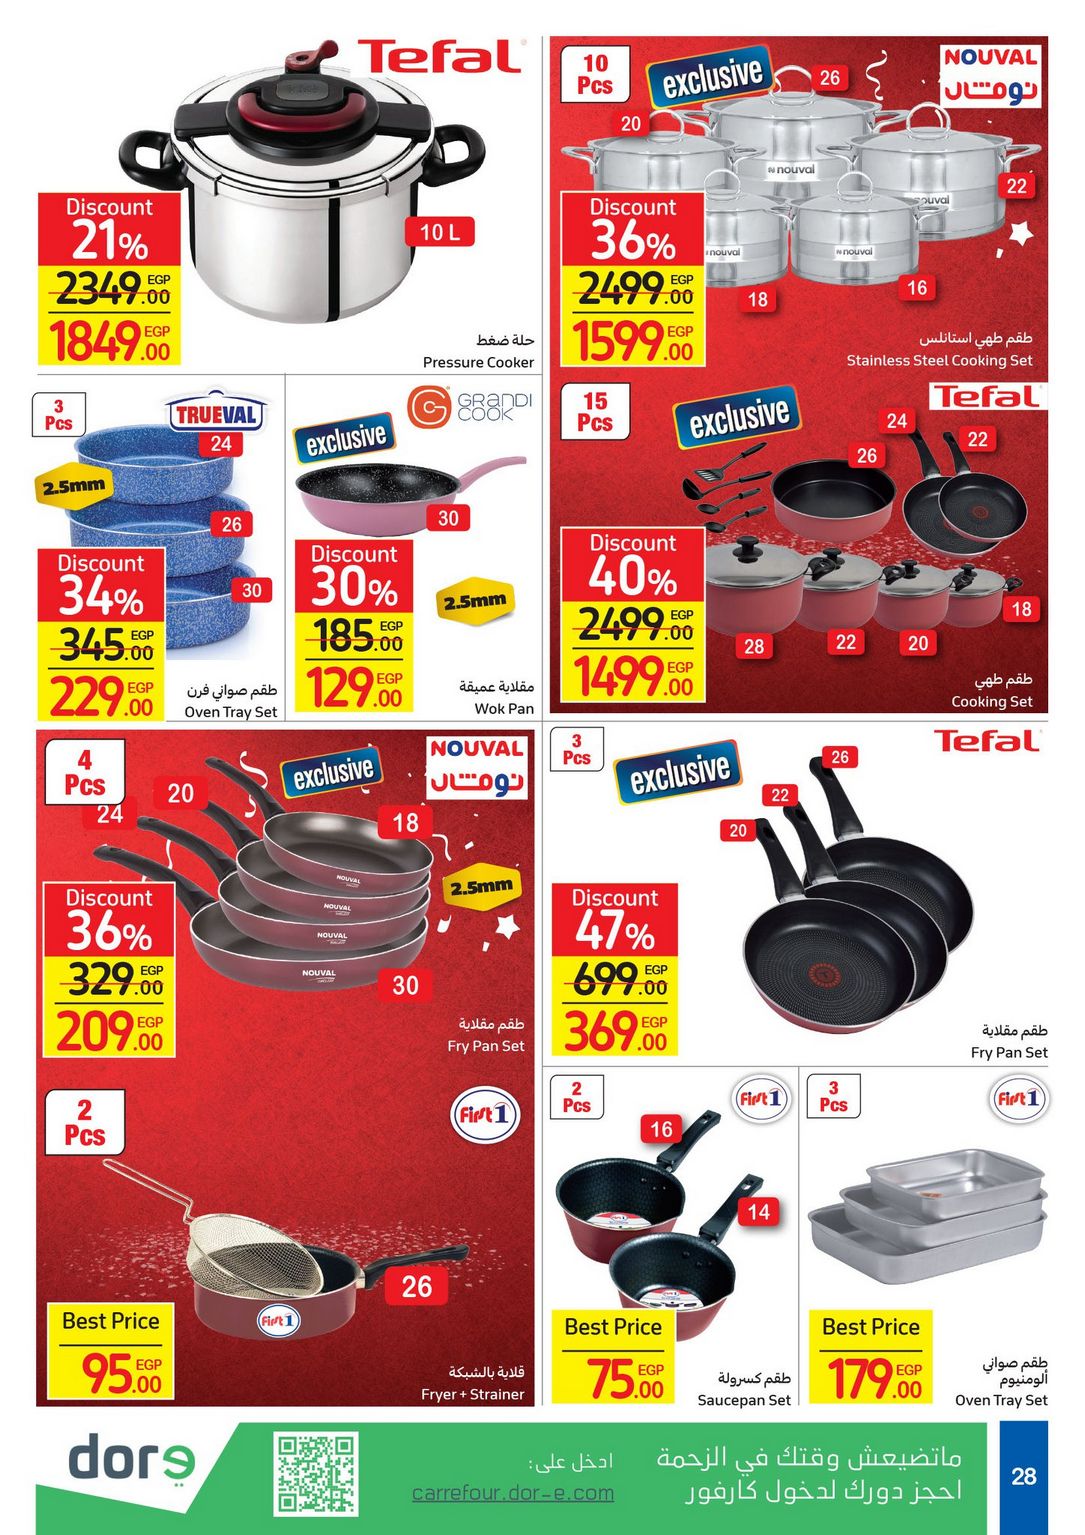 Carrefour Anniversary Offers till 18/2/2021 | Carrefour Egypt 30